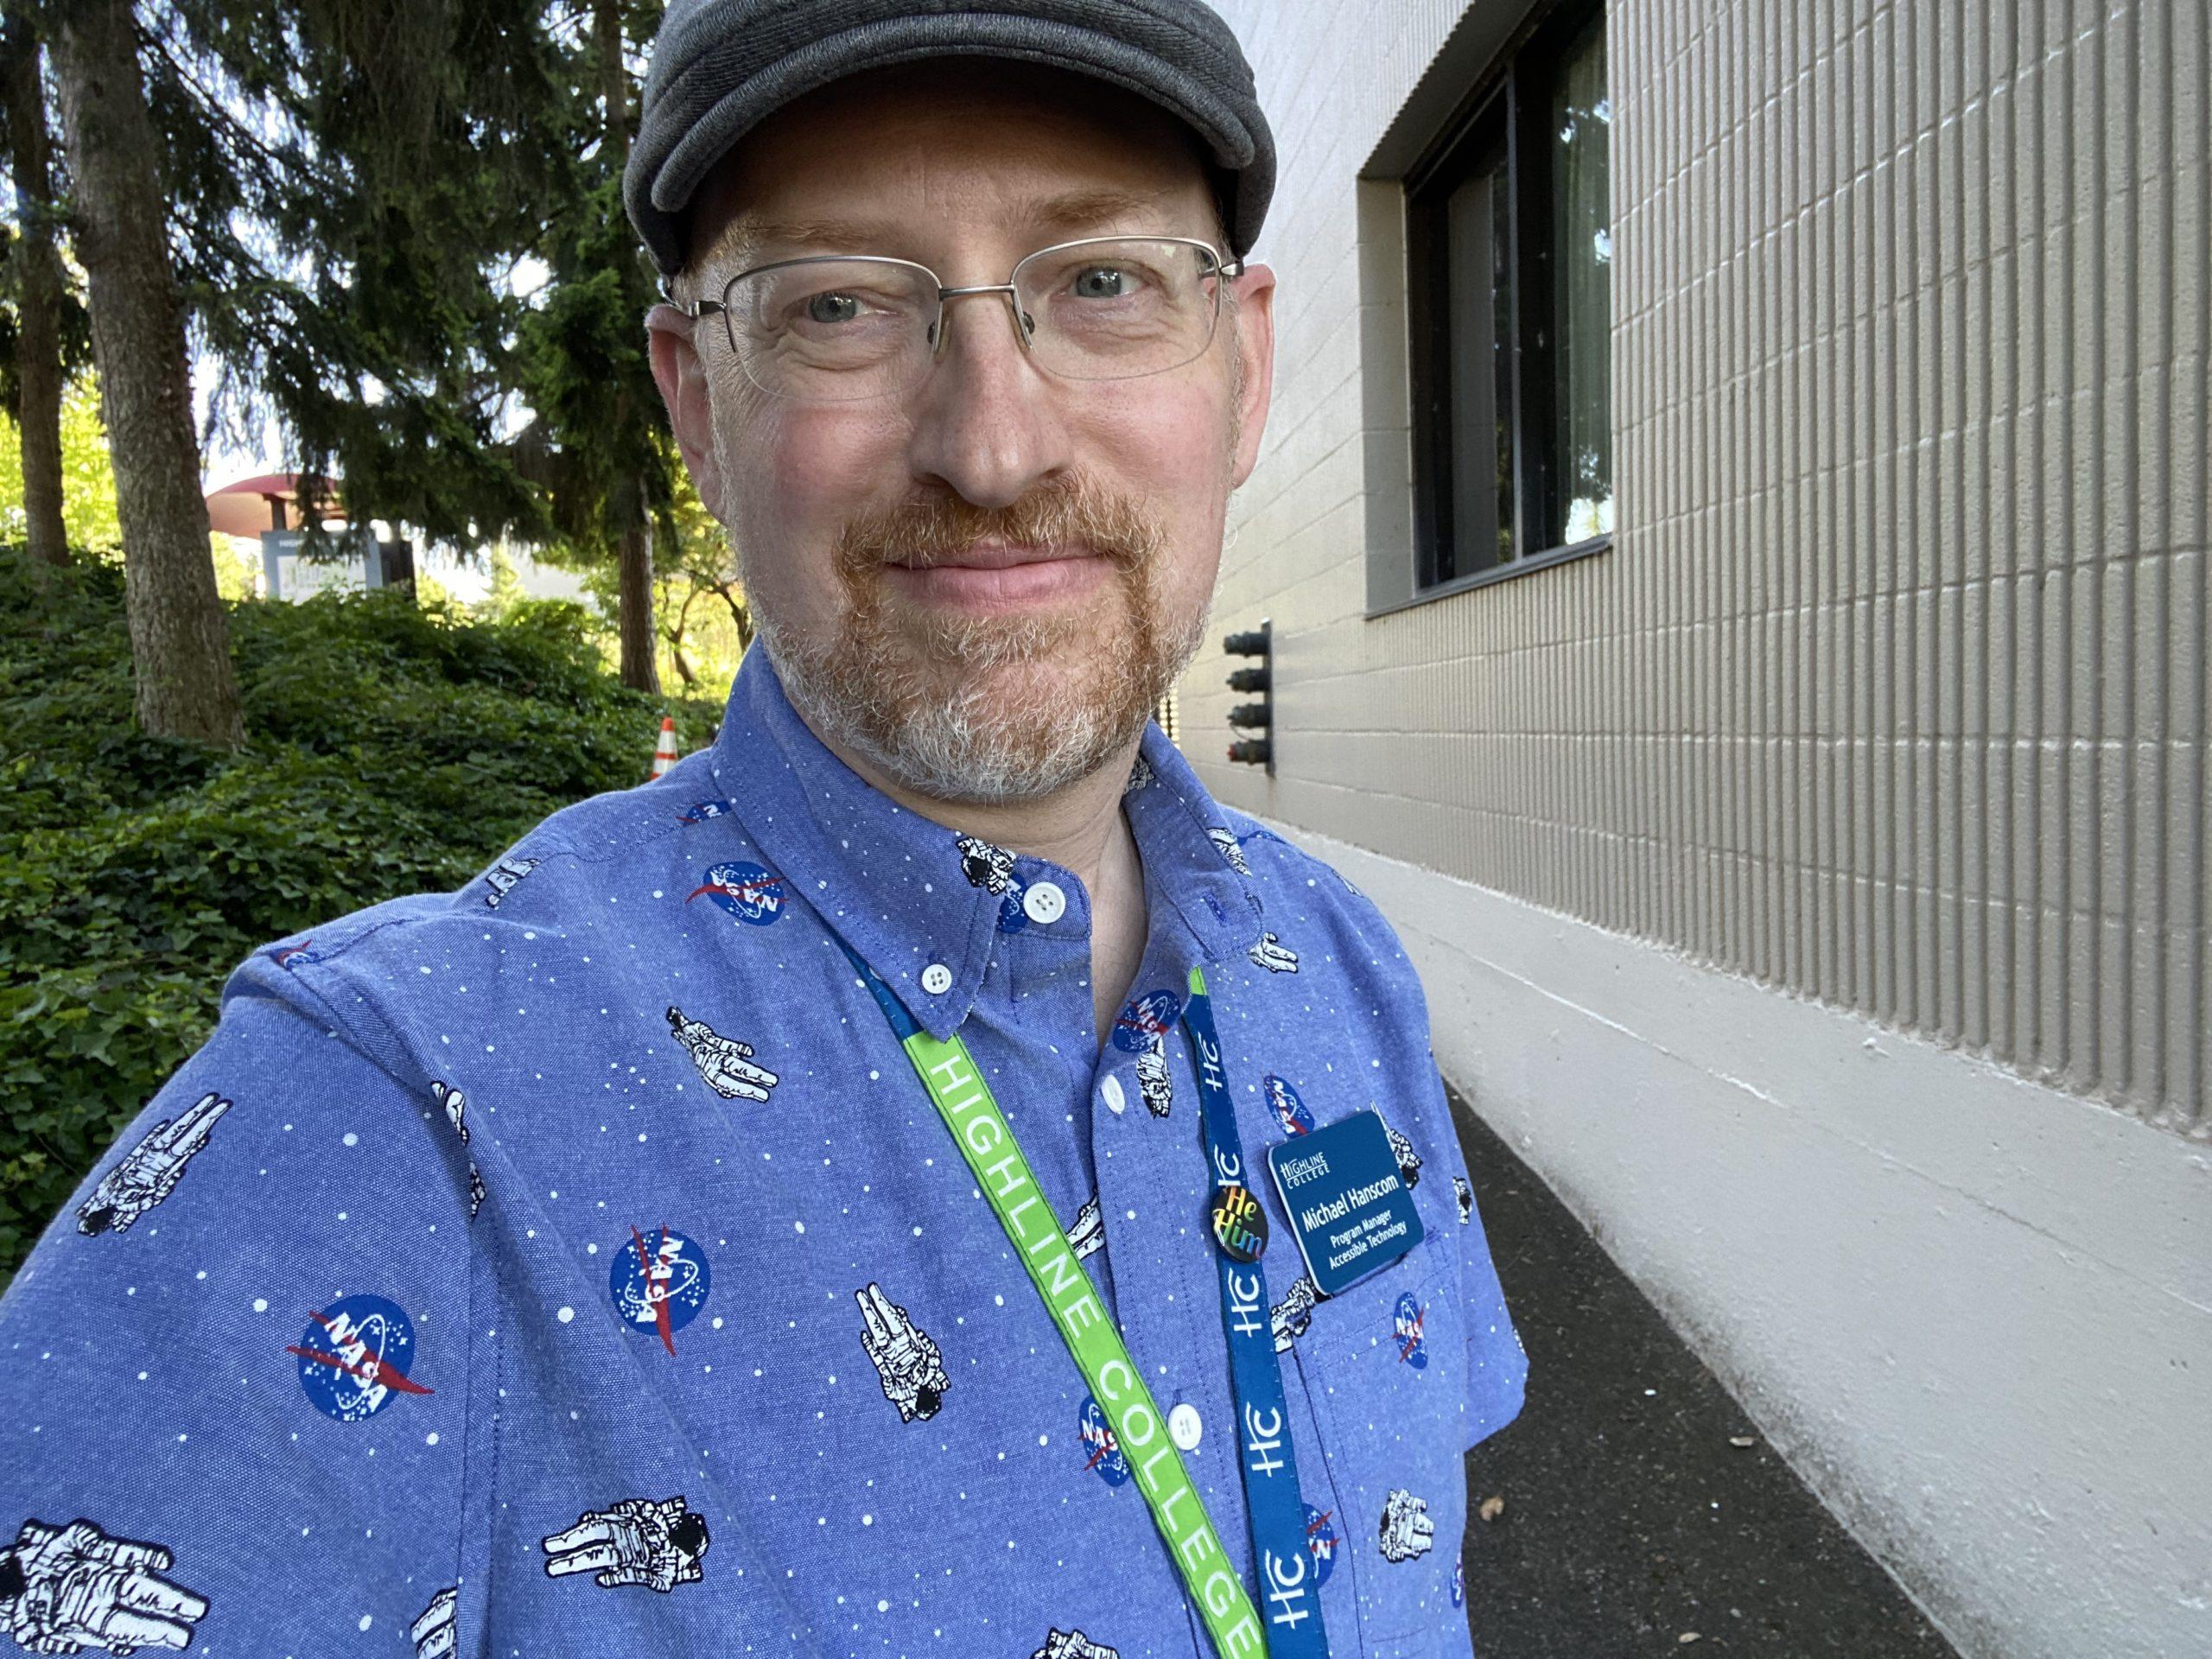 Me standing outside one of the buildings on campus, wearing a blue button-up short-sleeve shirt with a print of stars, astronauts, and the NASA logo.